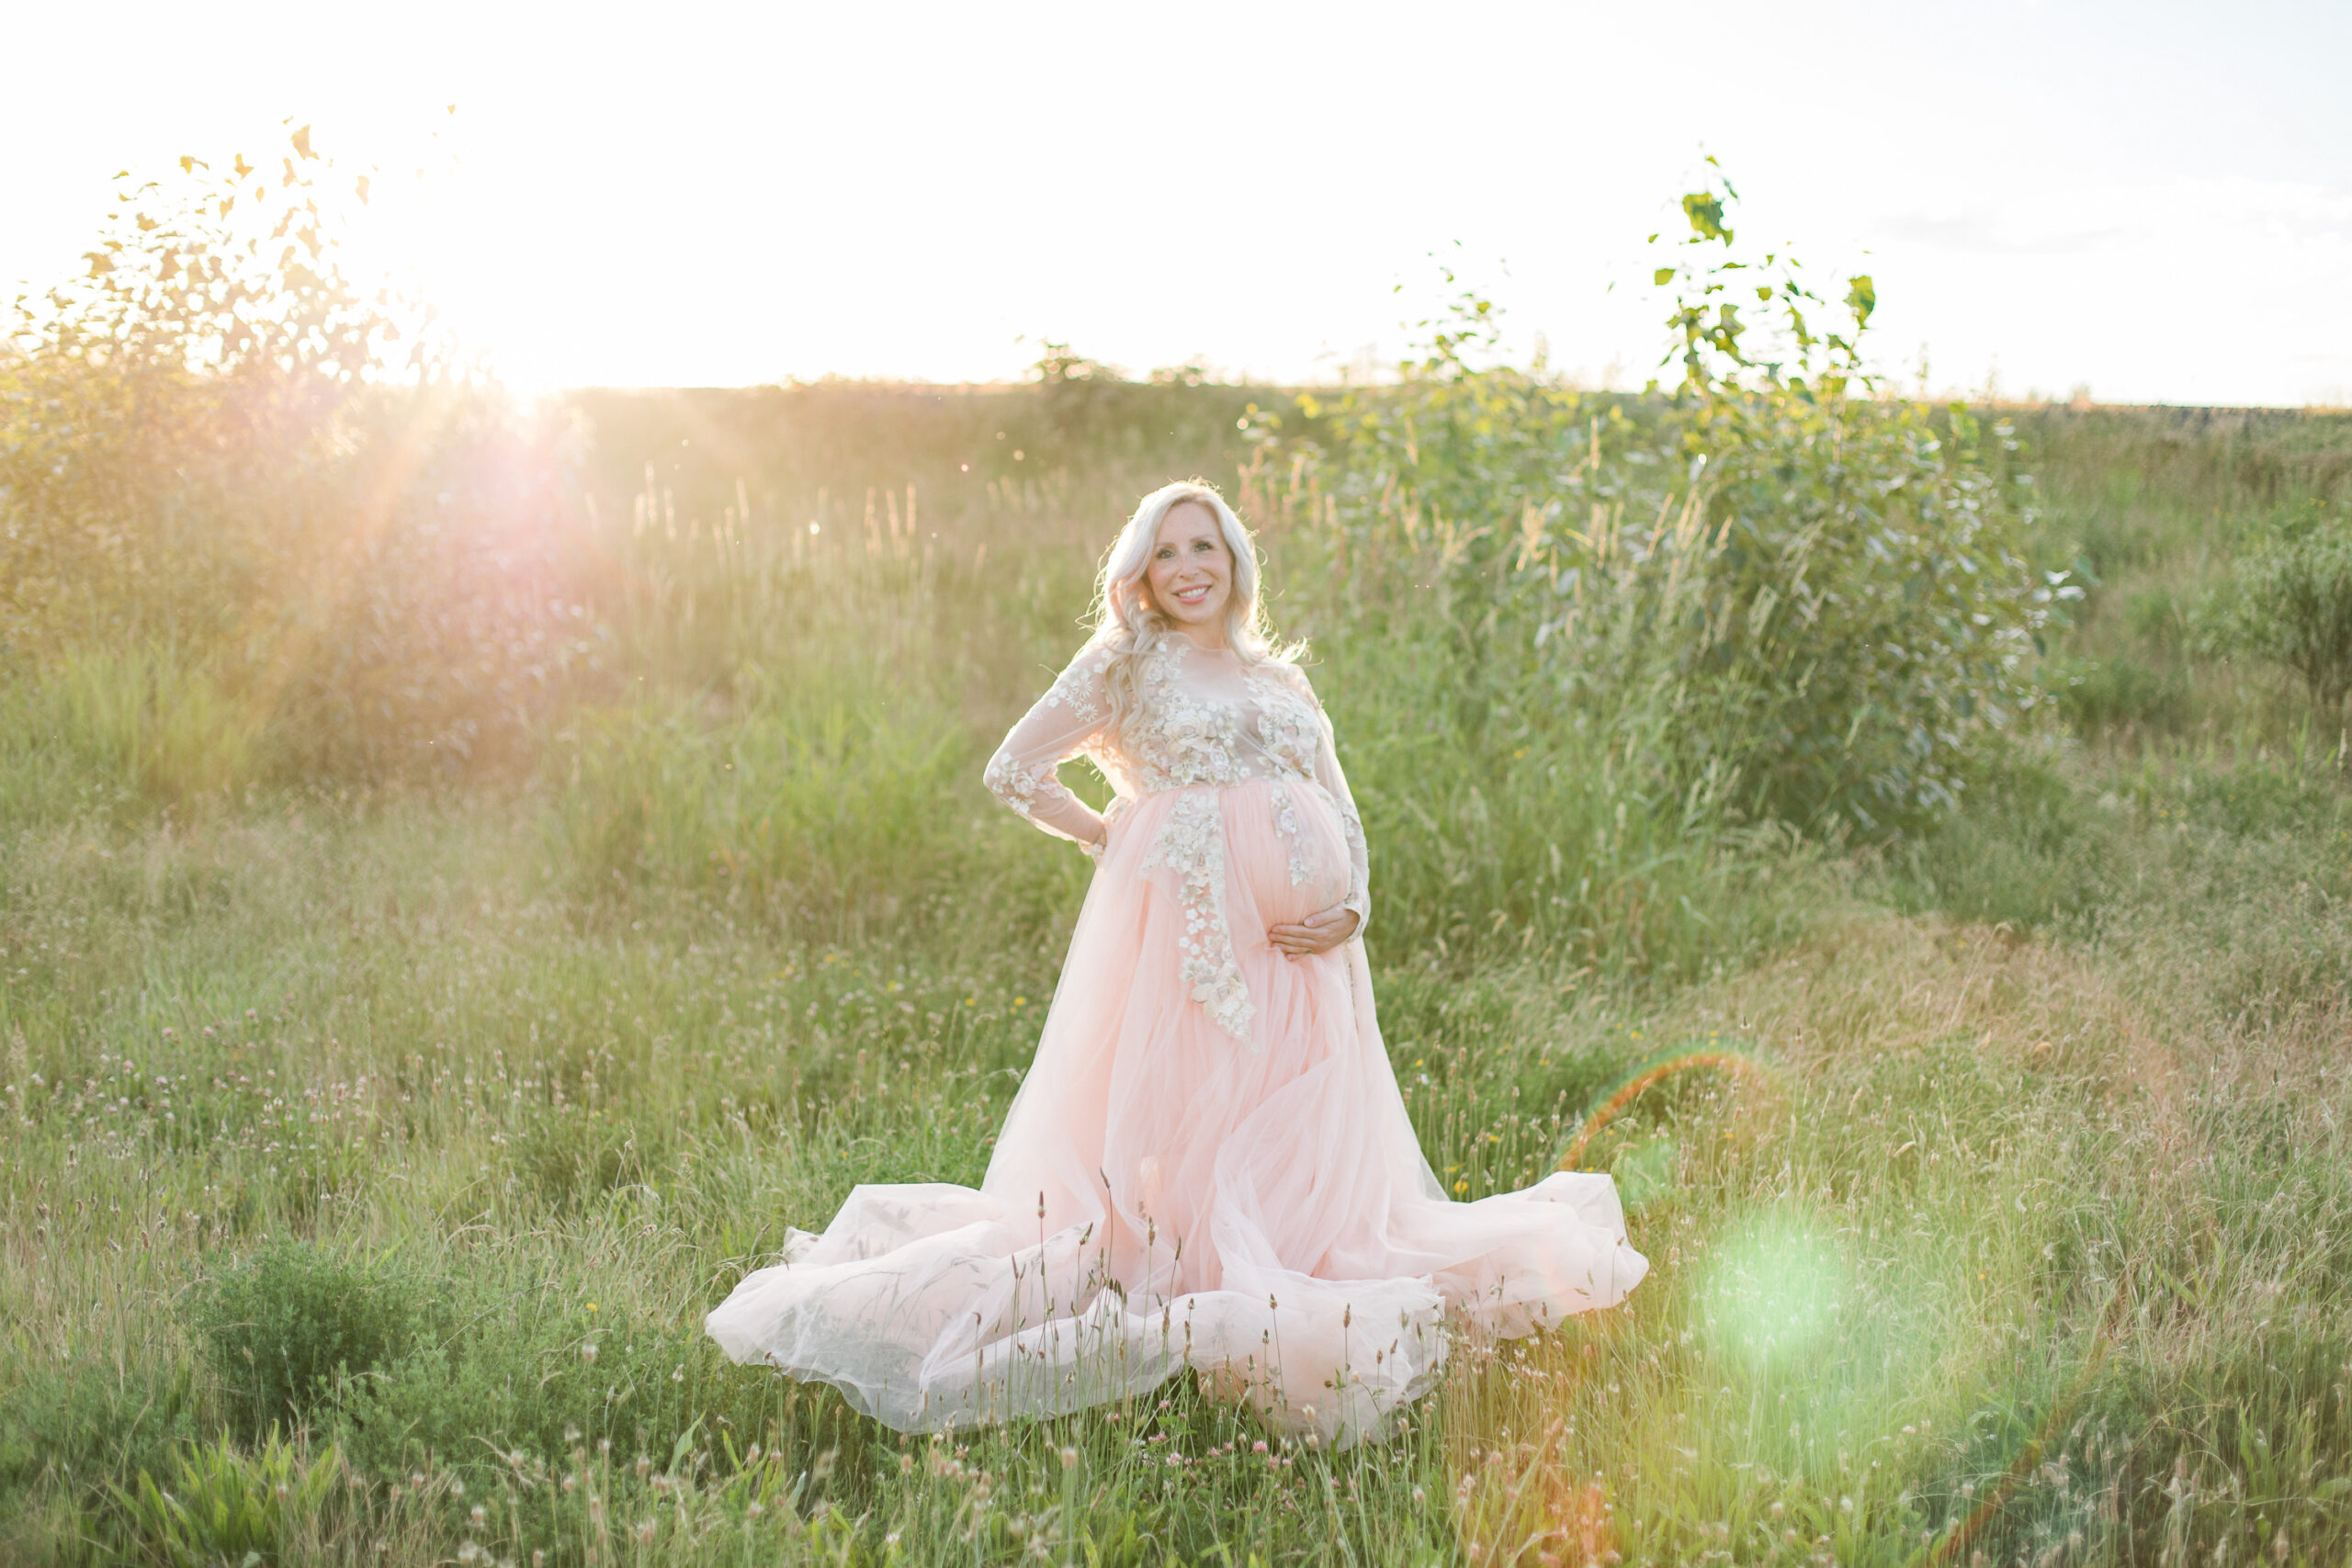 A pregnant woman stands in a grassy green field with a hand on her bump in a flowing pink maternity gown